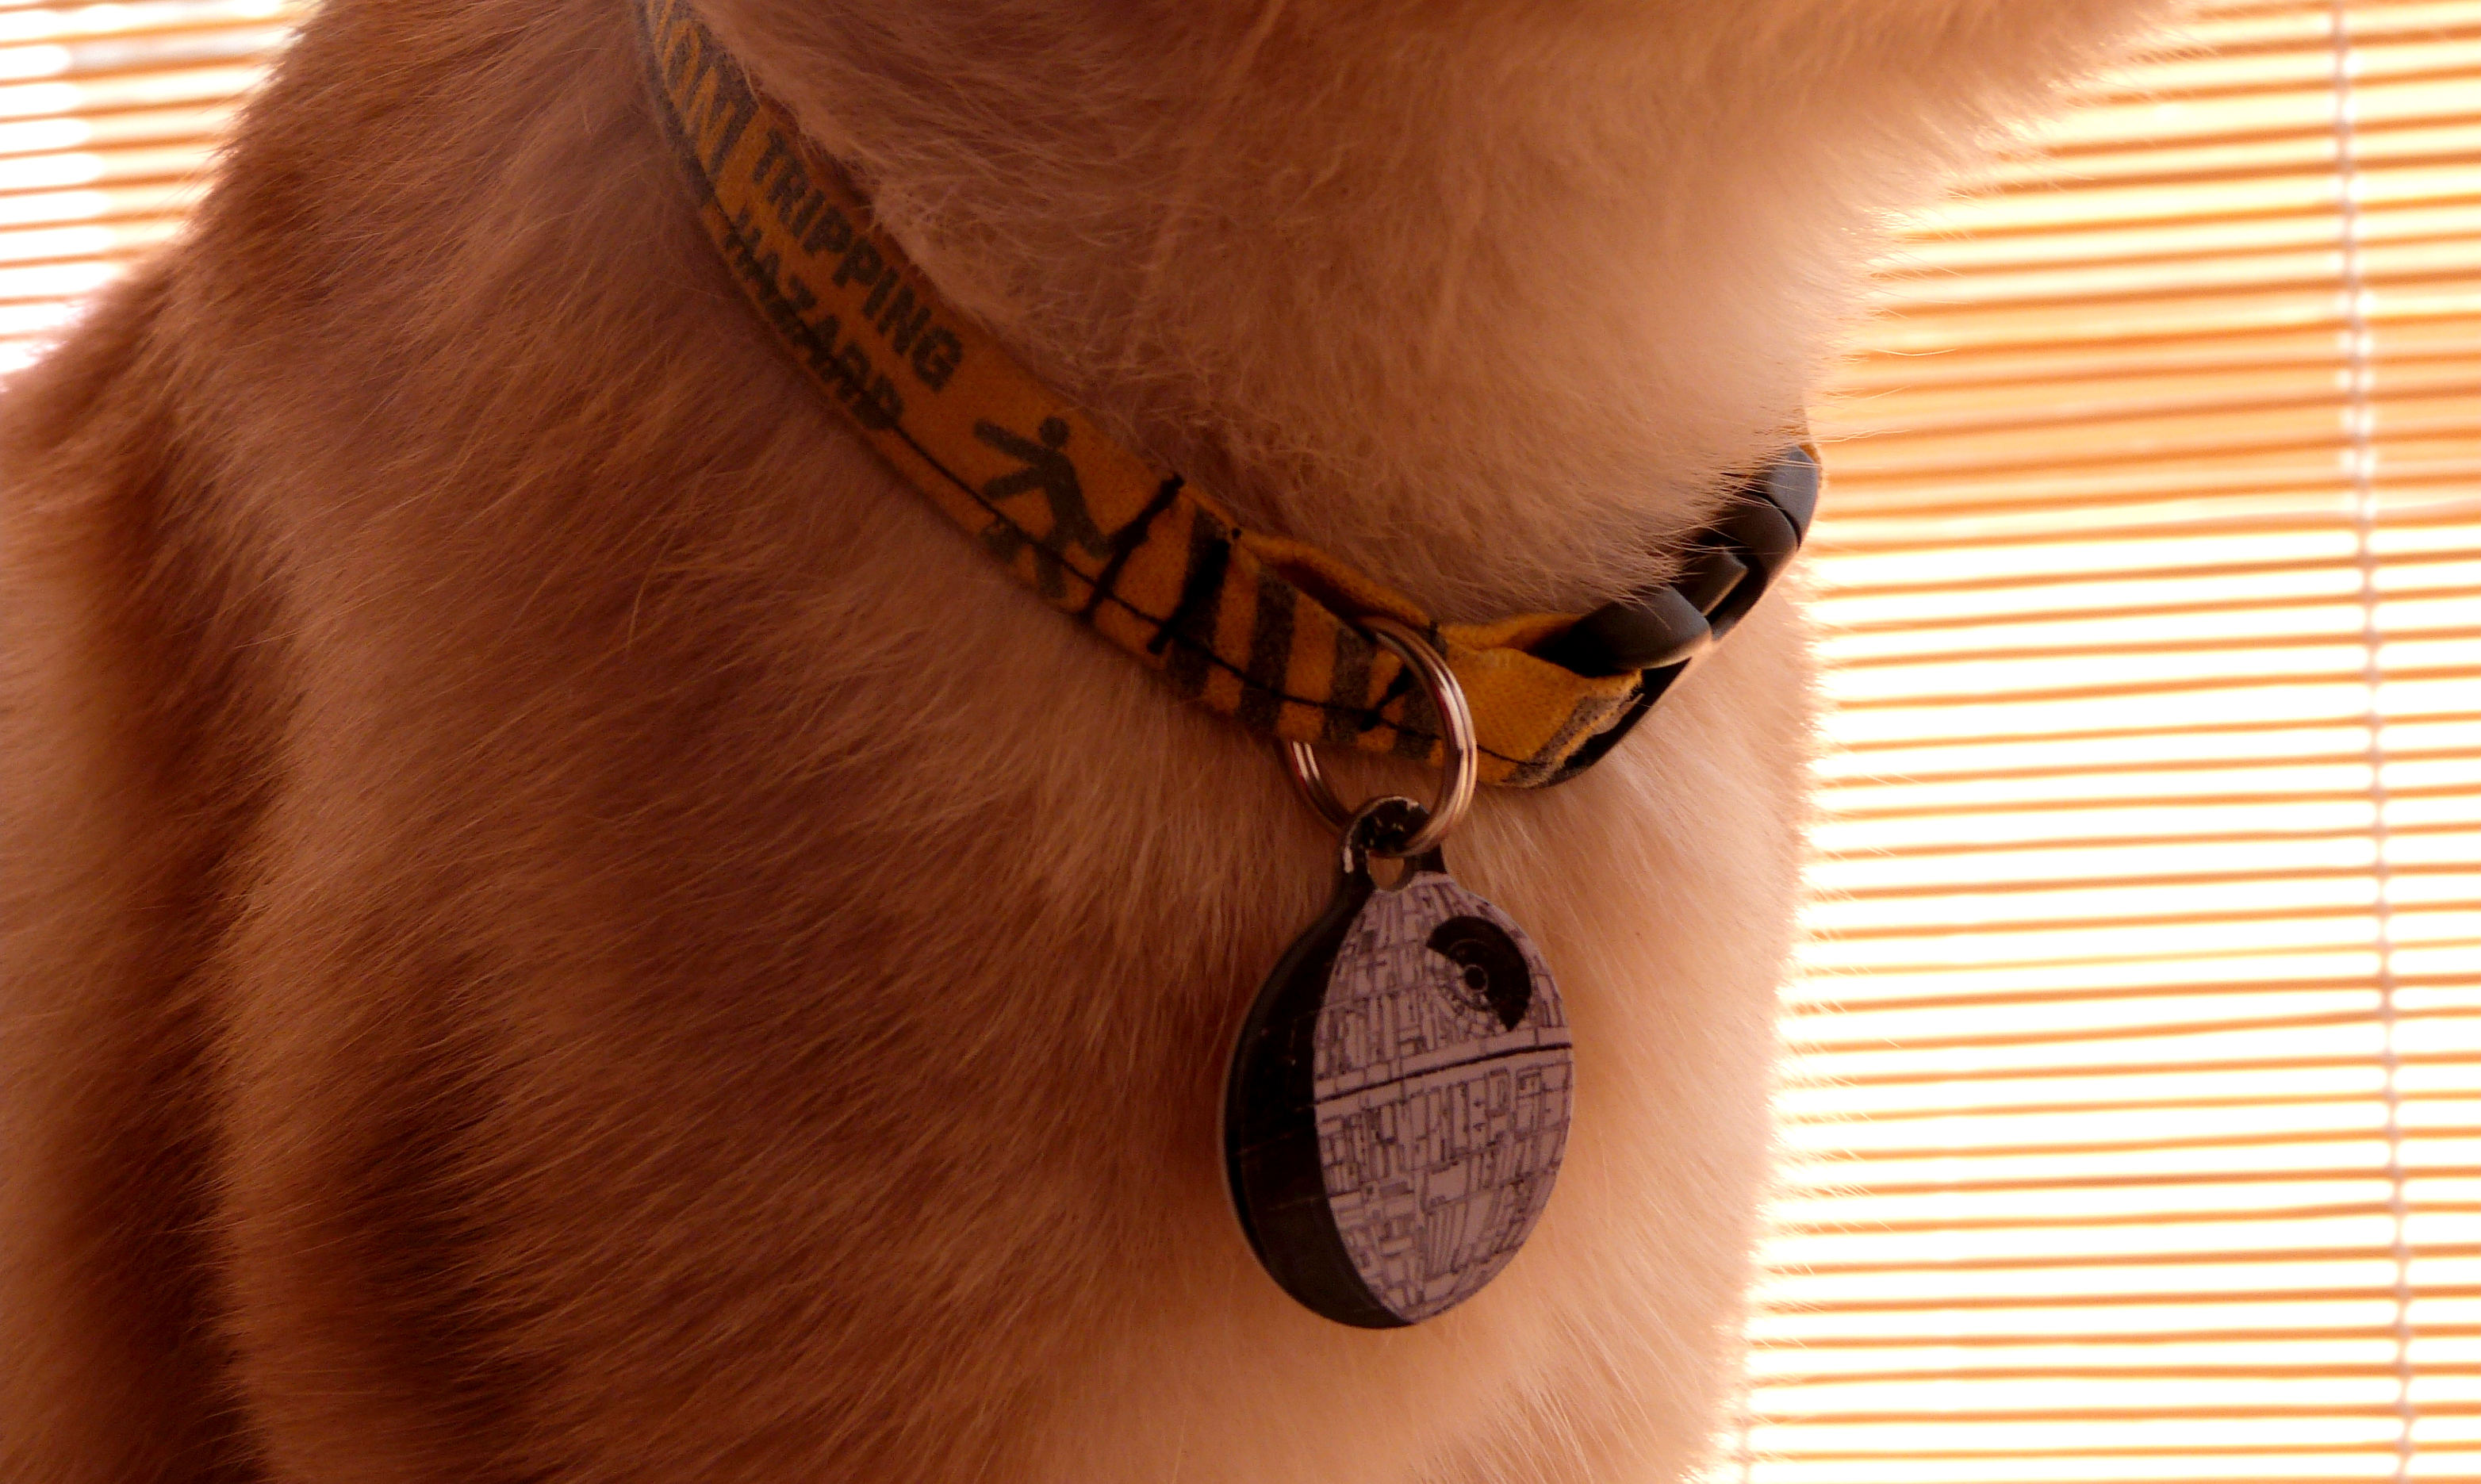 Collar & tag photos for website feedback, Accessories, Gear, Tripping, Tag, HQ Photo